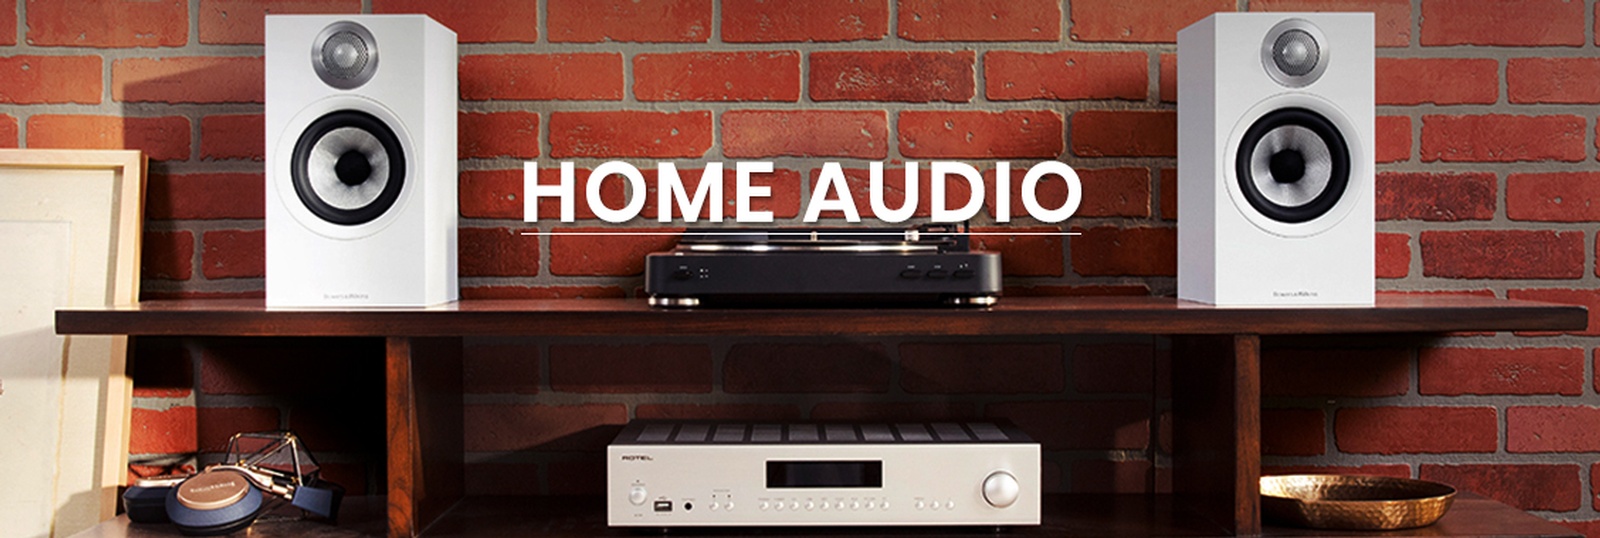 Home Audio banner